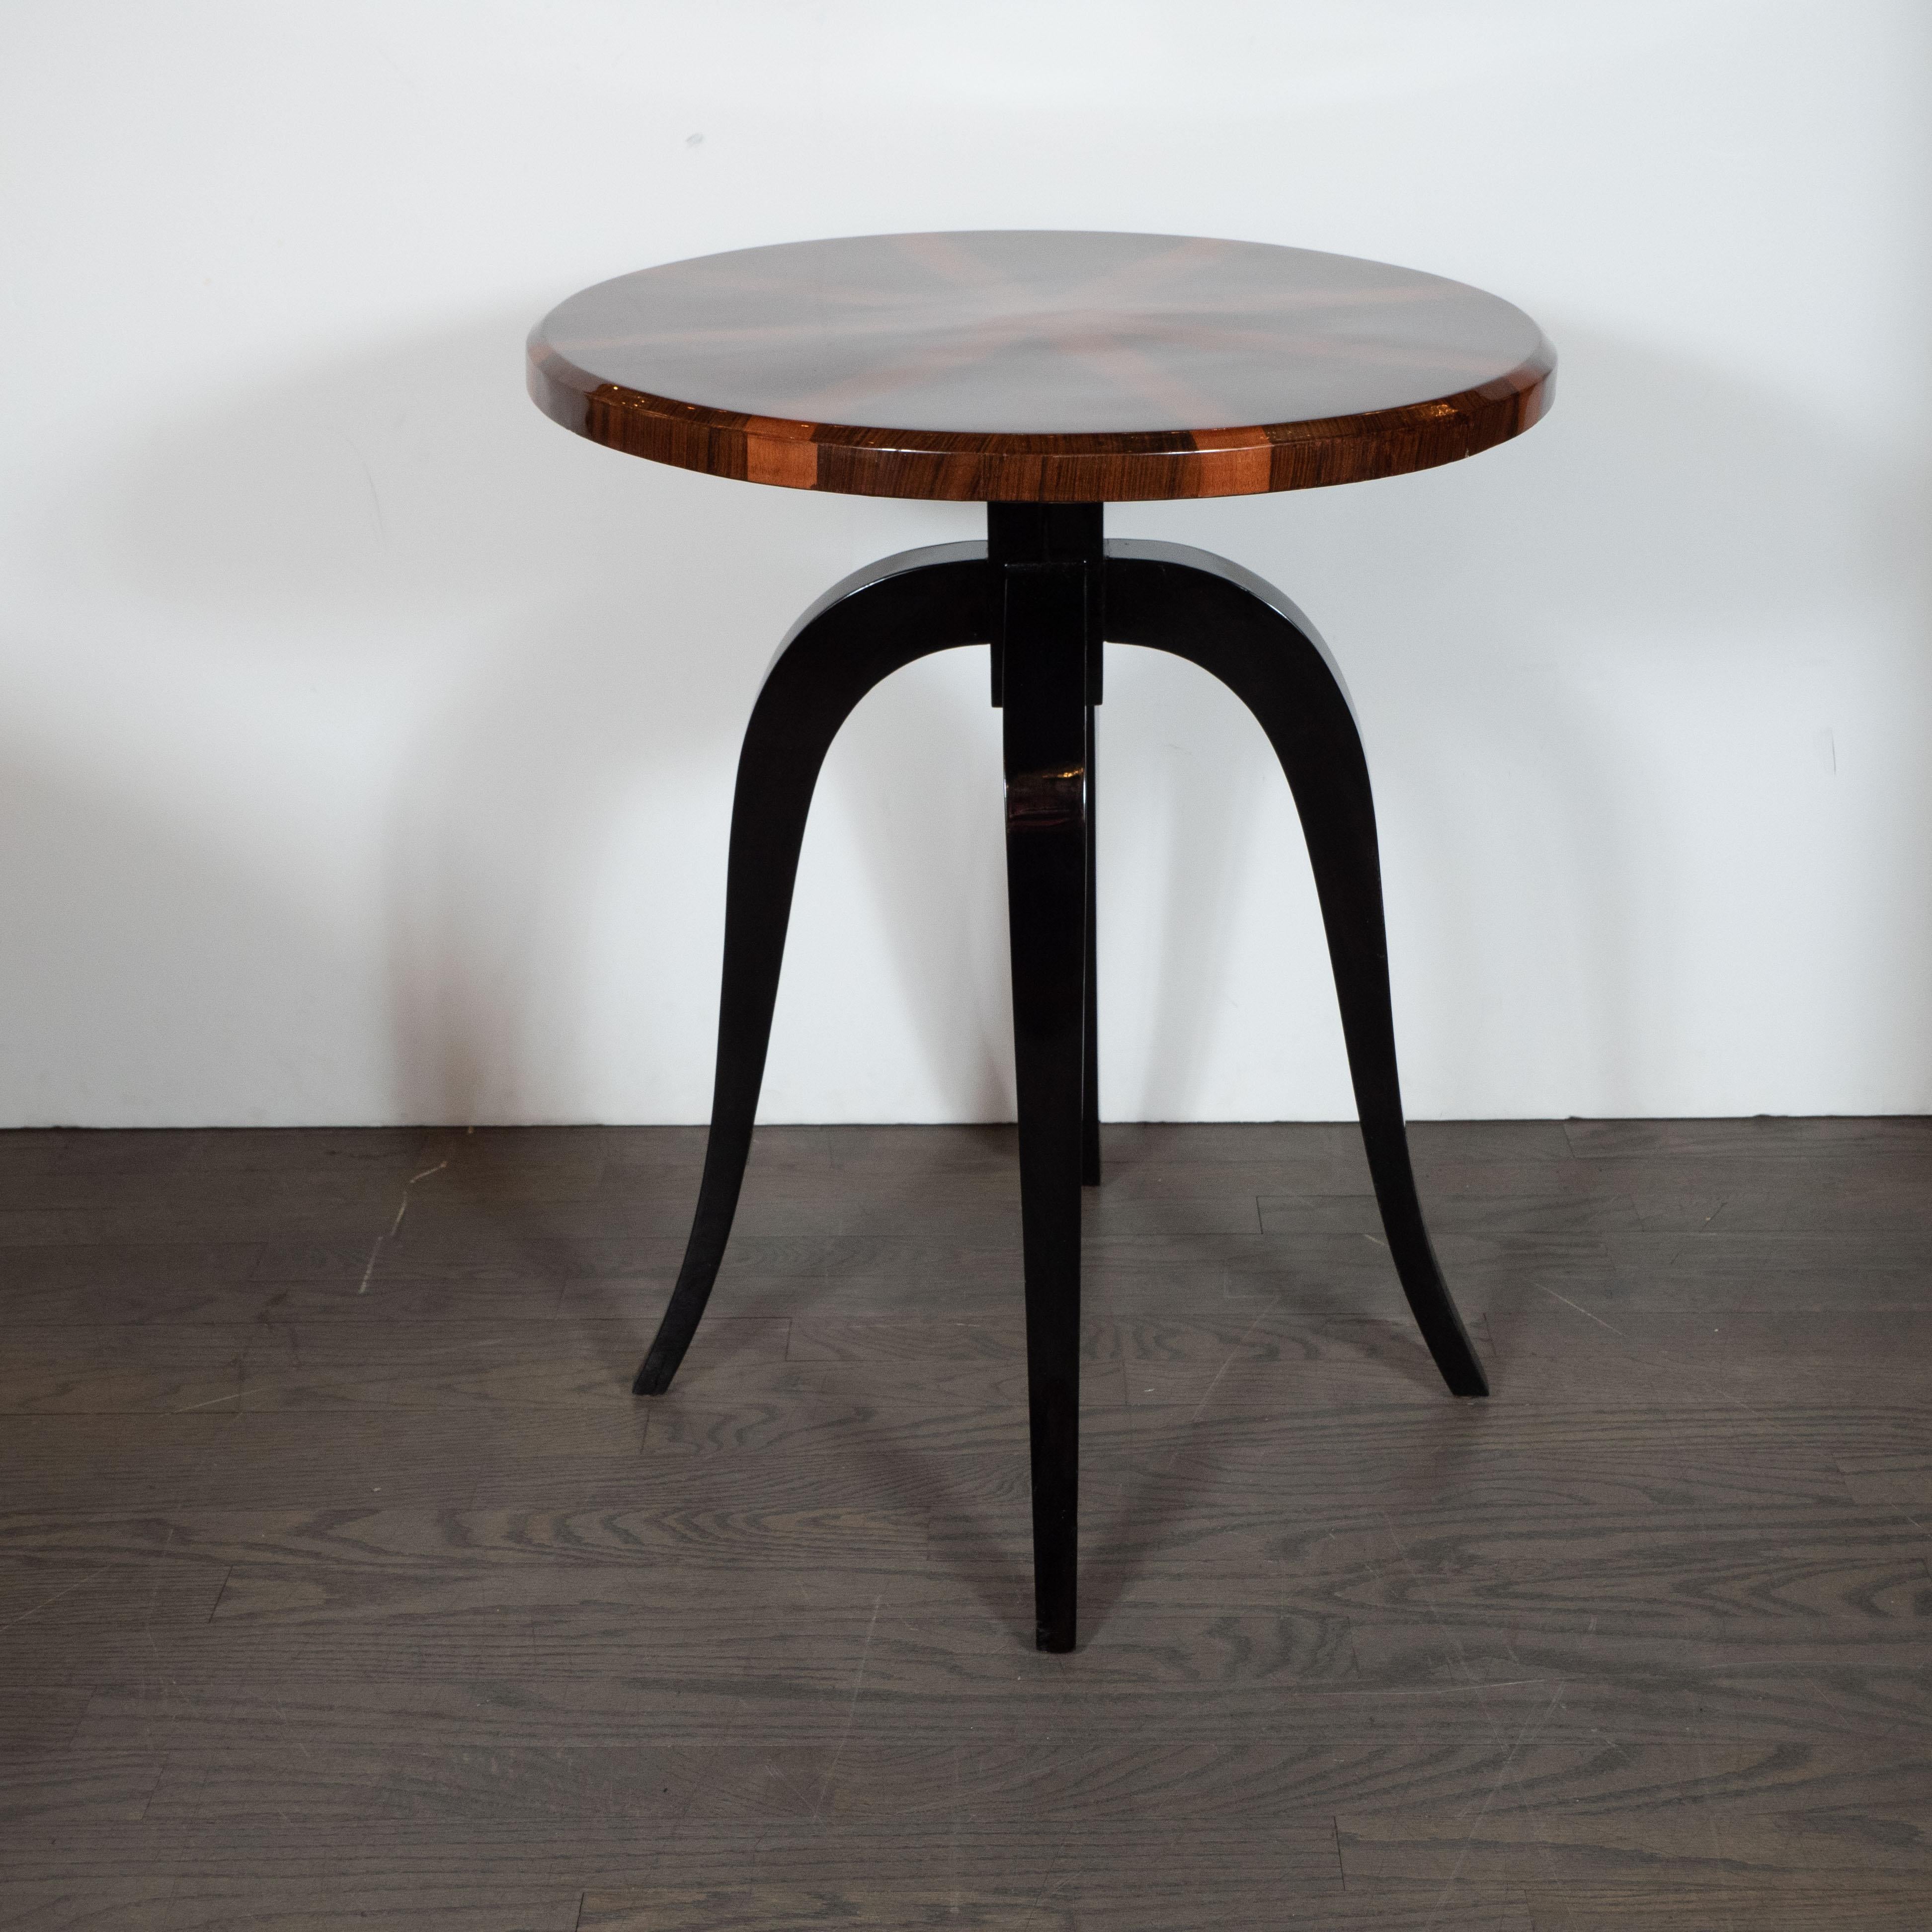 This sophisticated and dramatic Gueridon table was realized in France, circa 1930. Supported by four curvilinear legs in ebonized walnut, the table offers a round top composed of walnut and carpathian elm bookmatched to create a stunning starburst